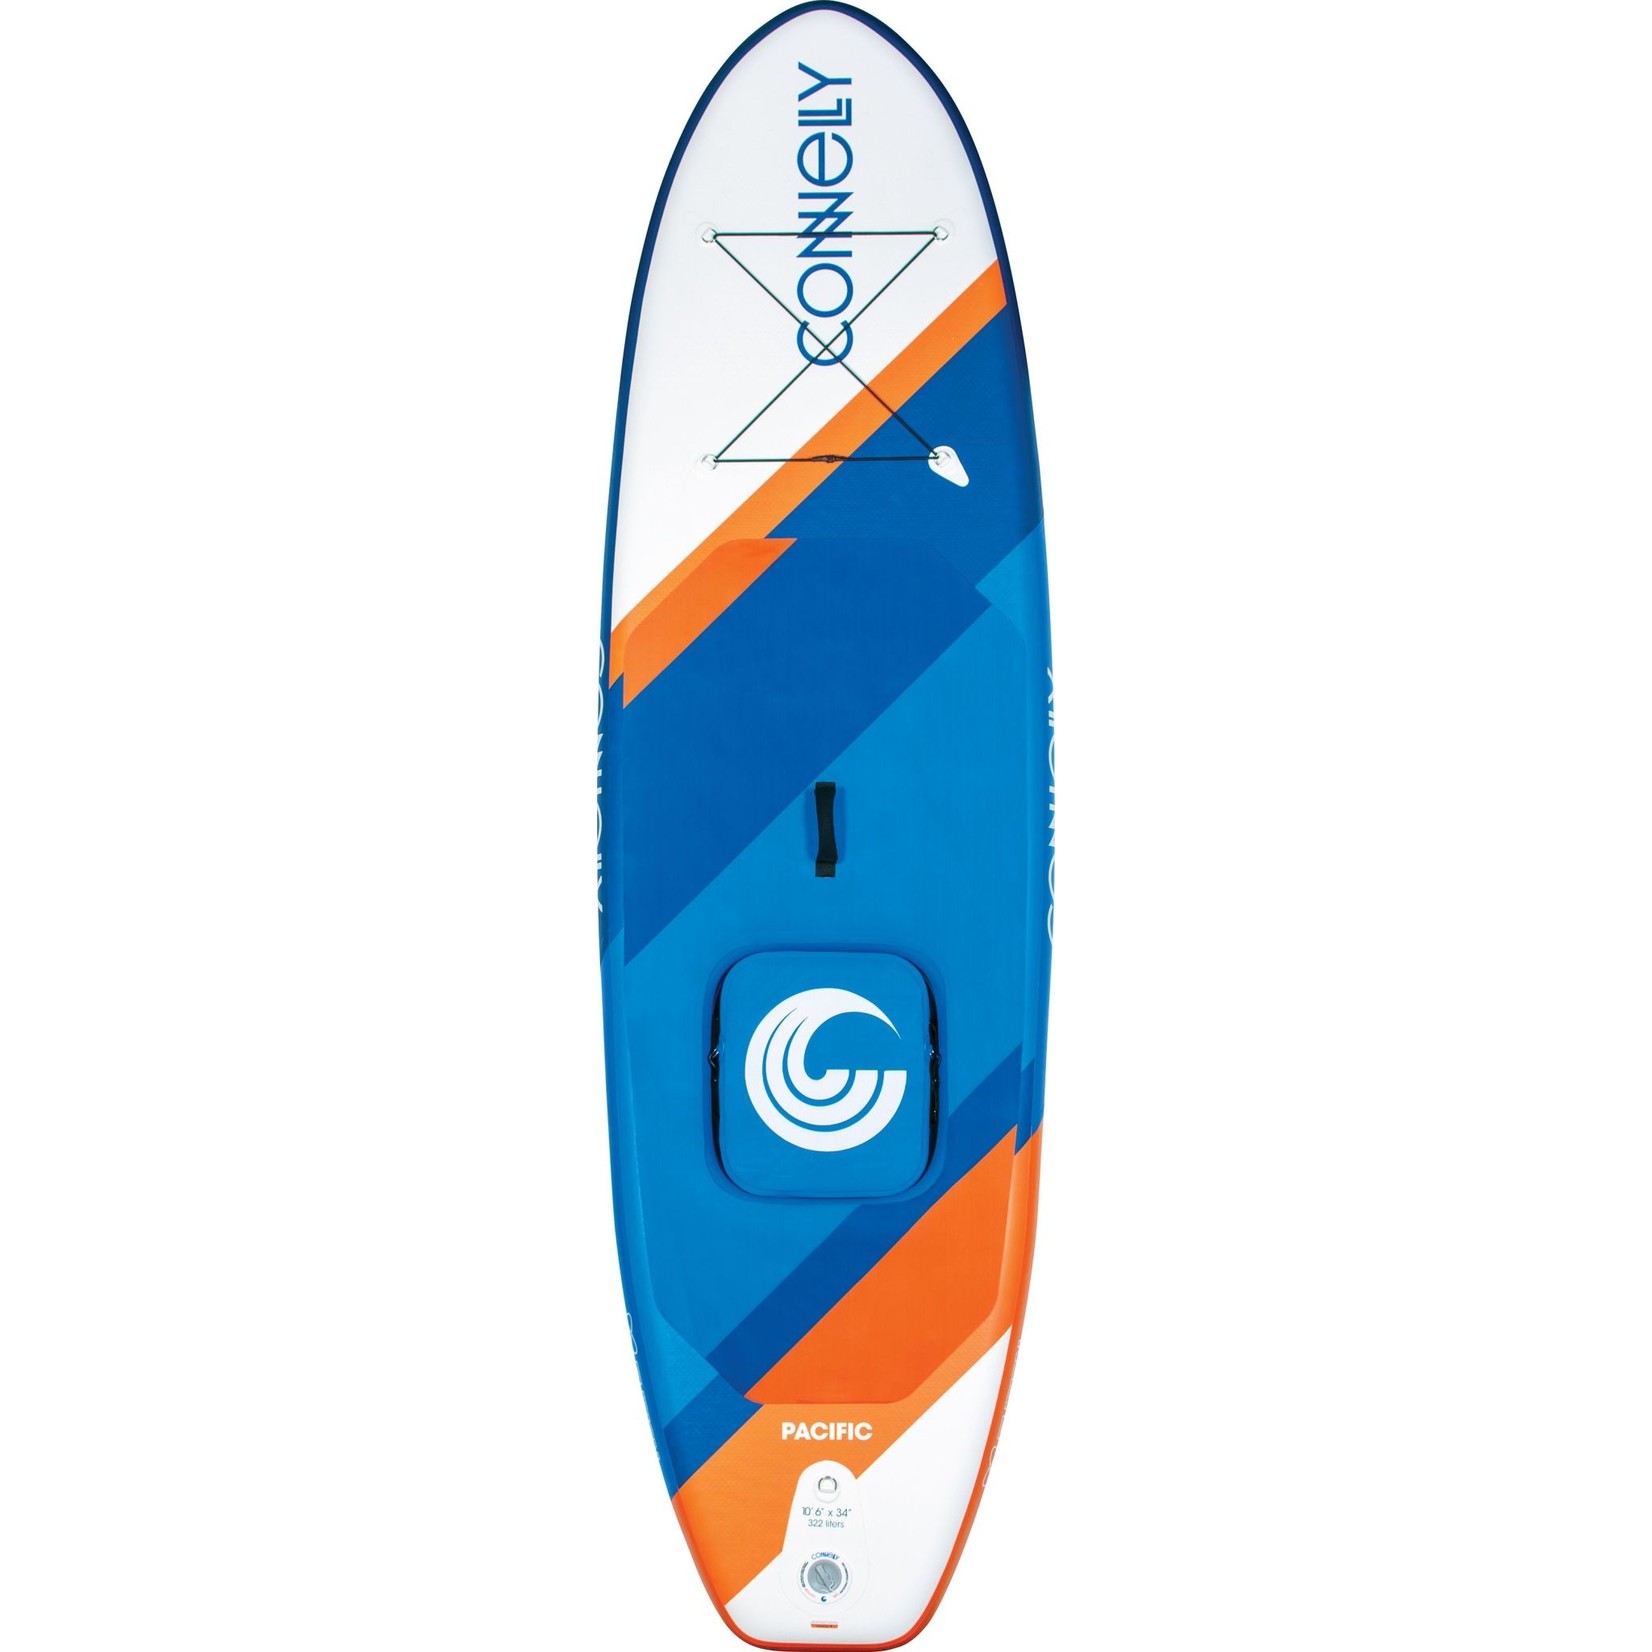 Connelly Pacific iSUP Paddleboard